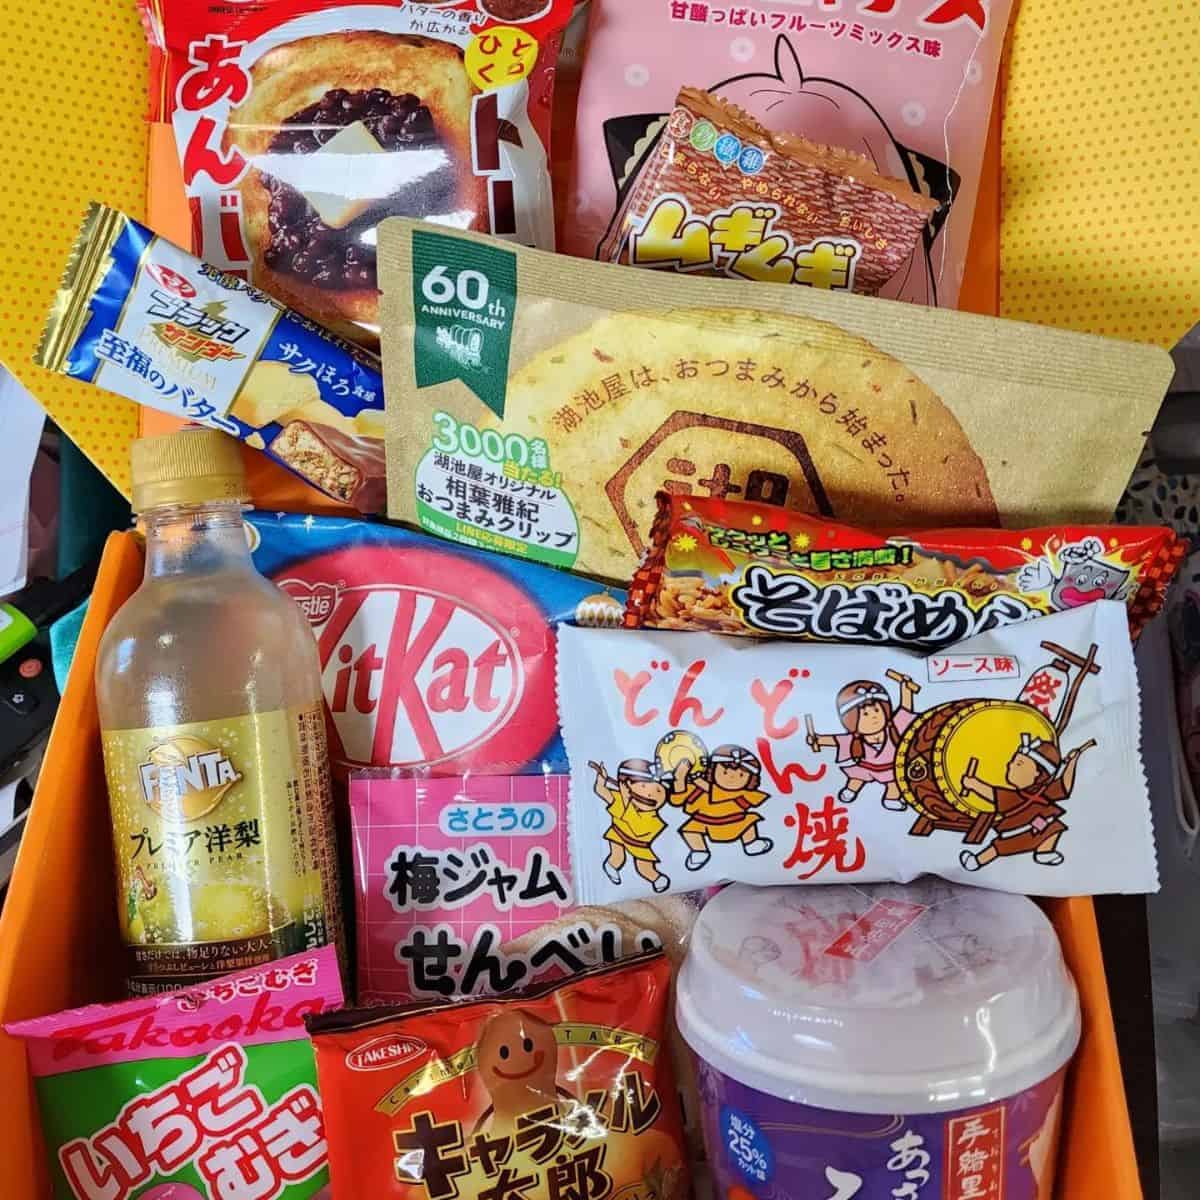 Tokyo Treat with authentic Japan candies and beverages